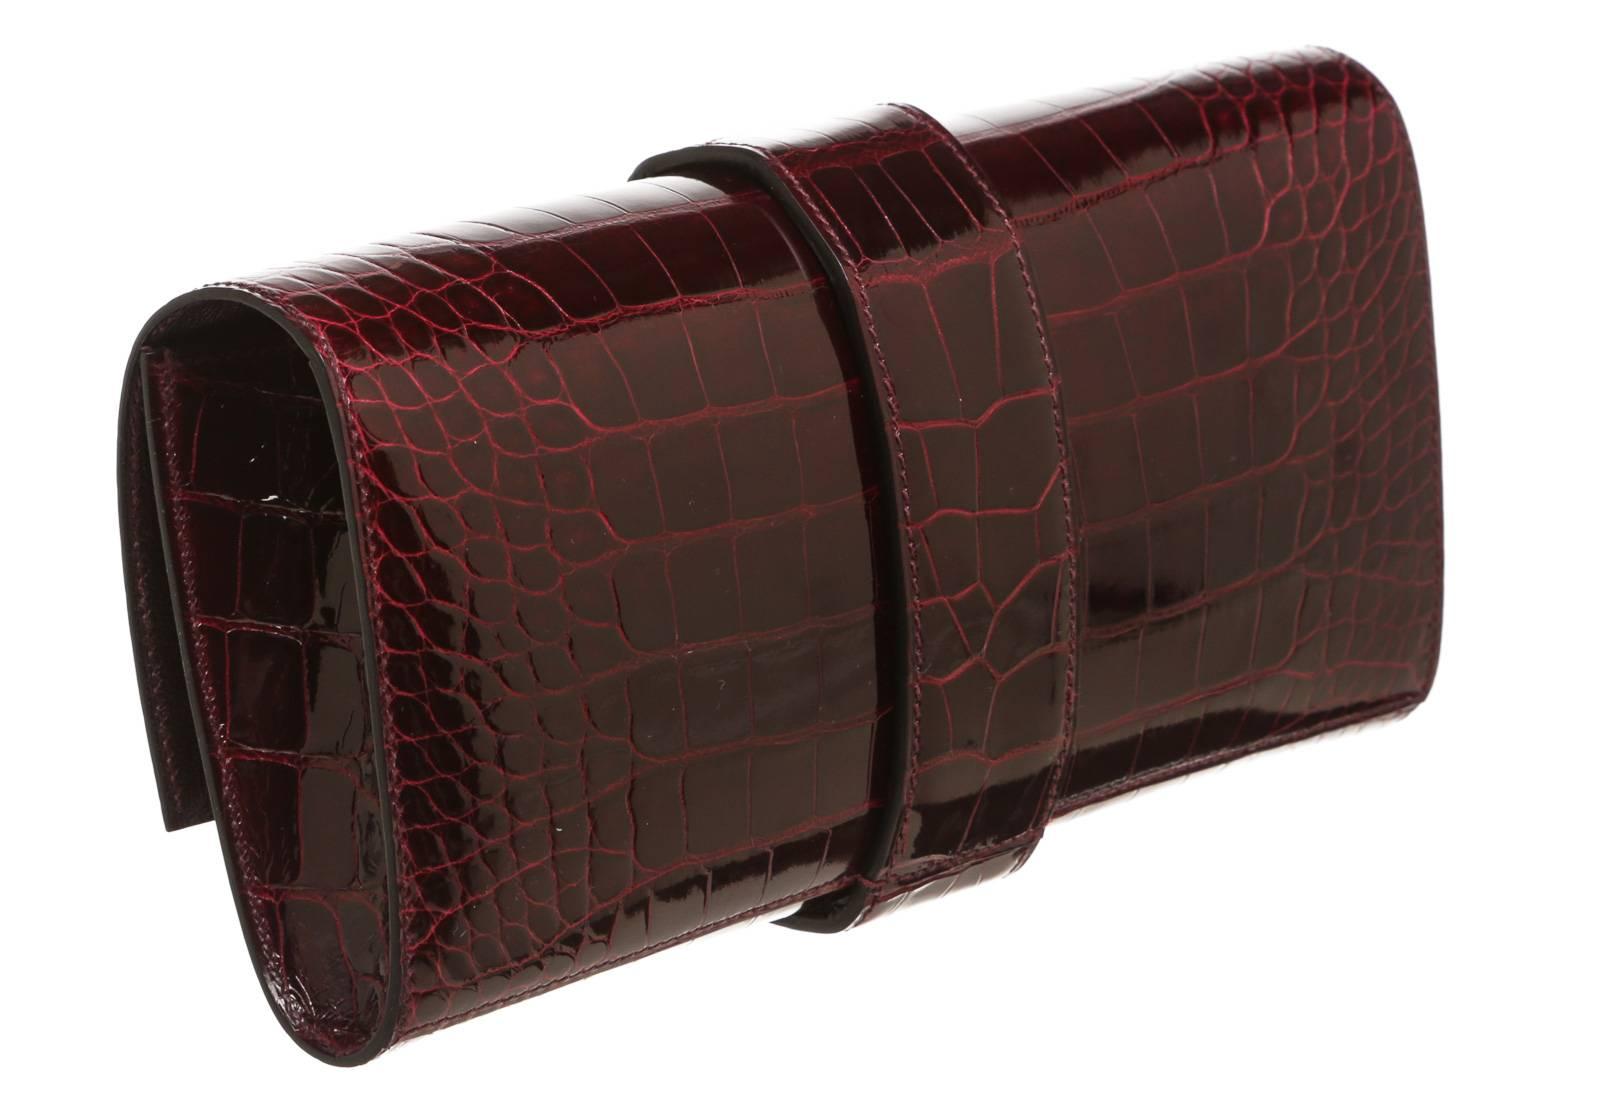 A clutch is a staple, but this Medor features a decadent design that shouts Hermes. Crafted with a stunning burgundy alligator, it contains palladium hardware and a collier de chien closure in the front. The rounded design is comfortable to carry,